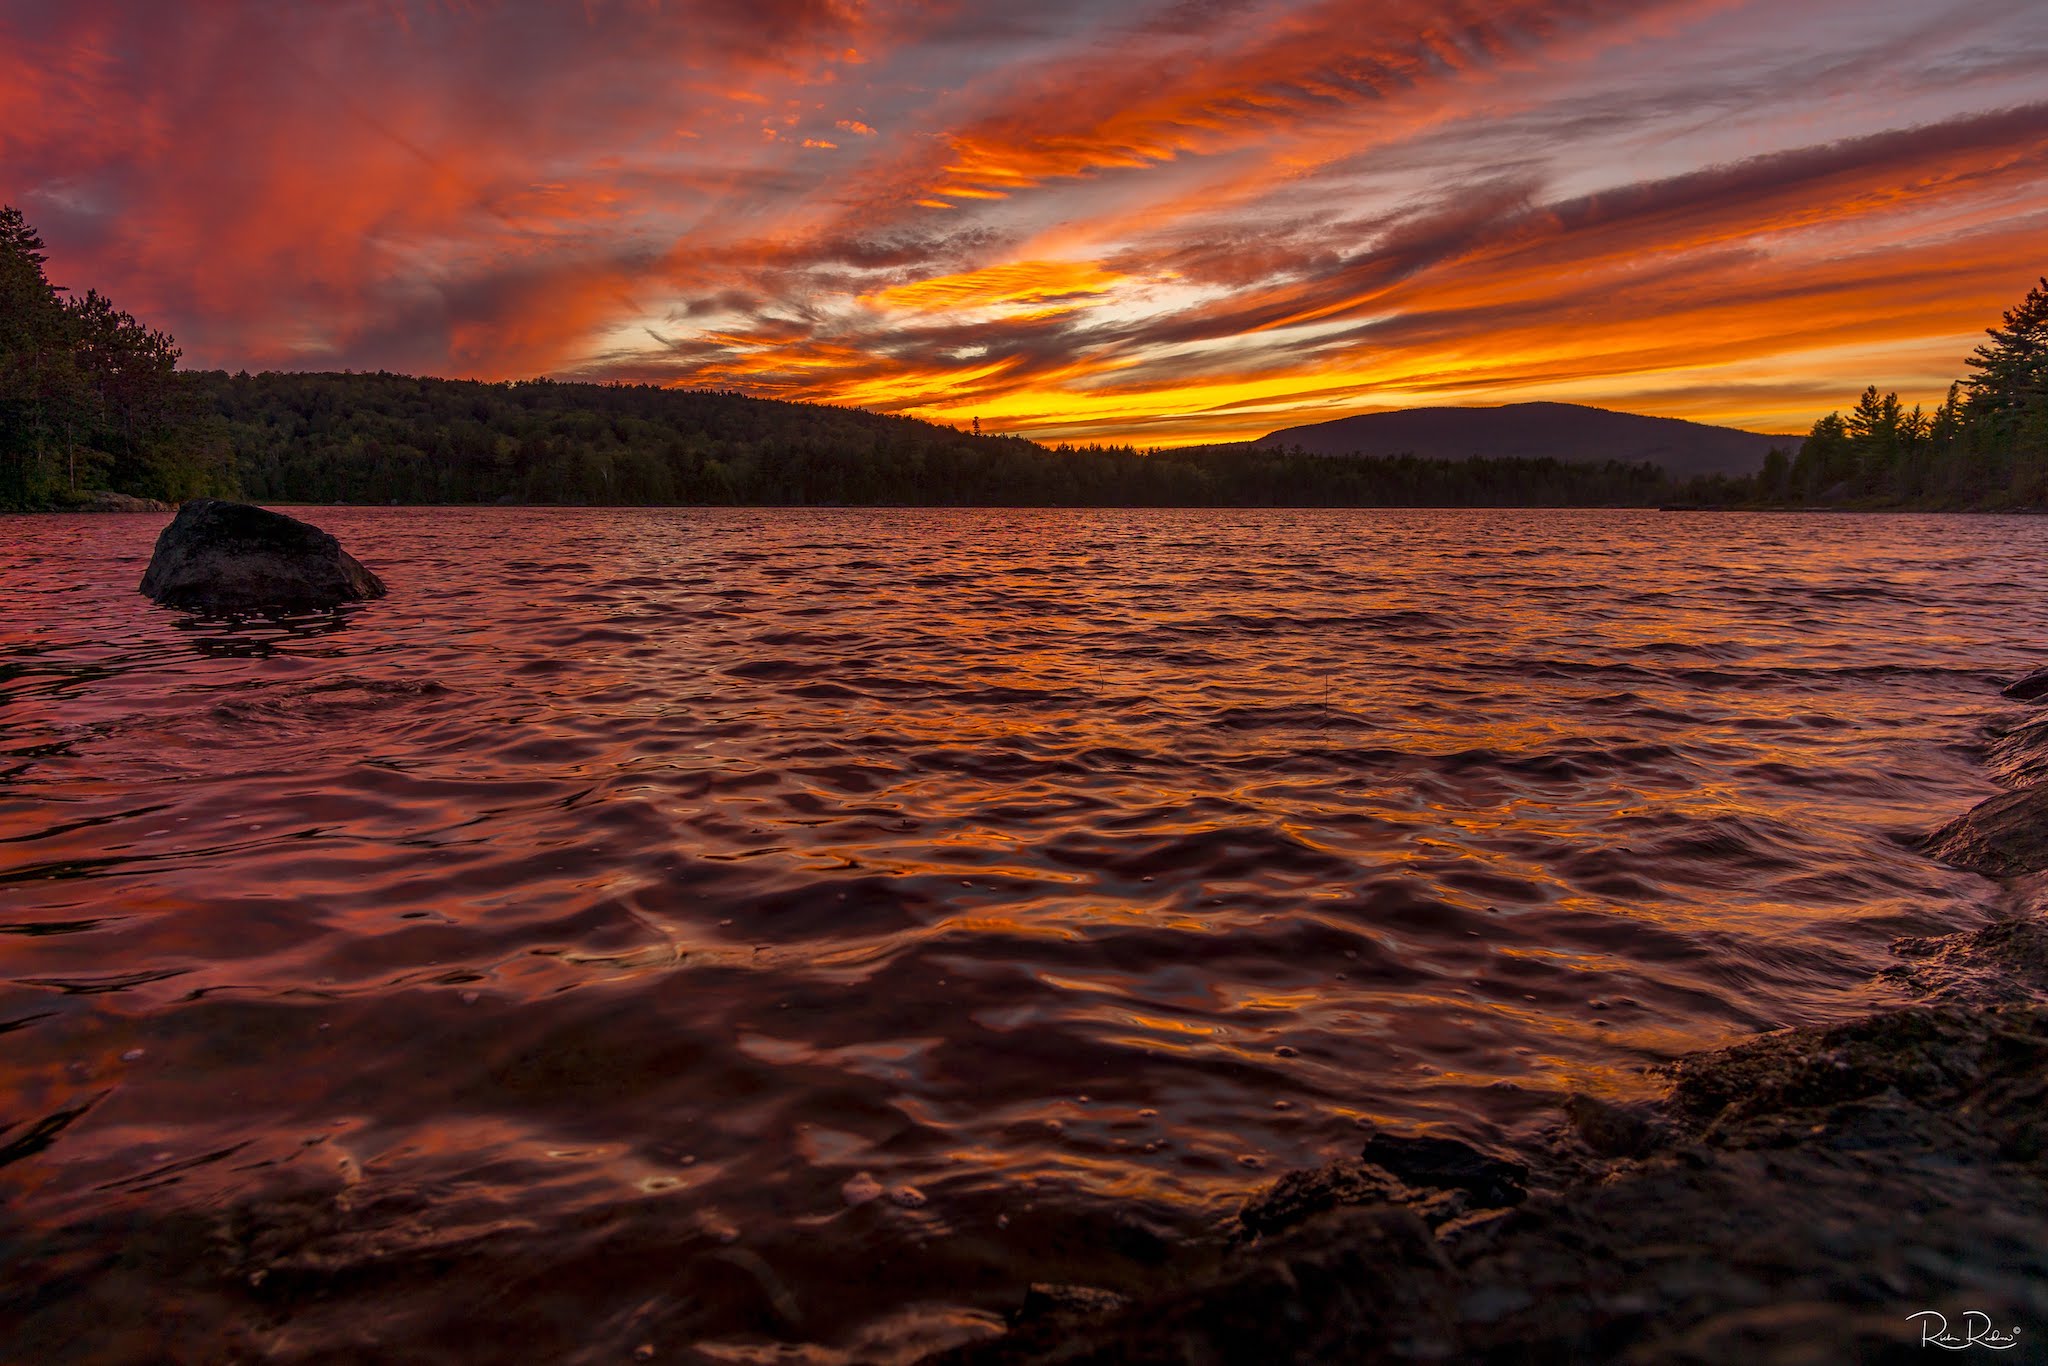 Sunset over a lake in Maine